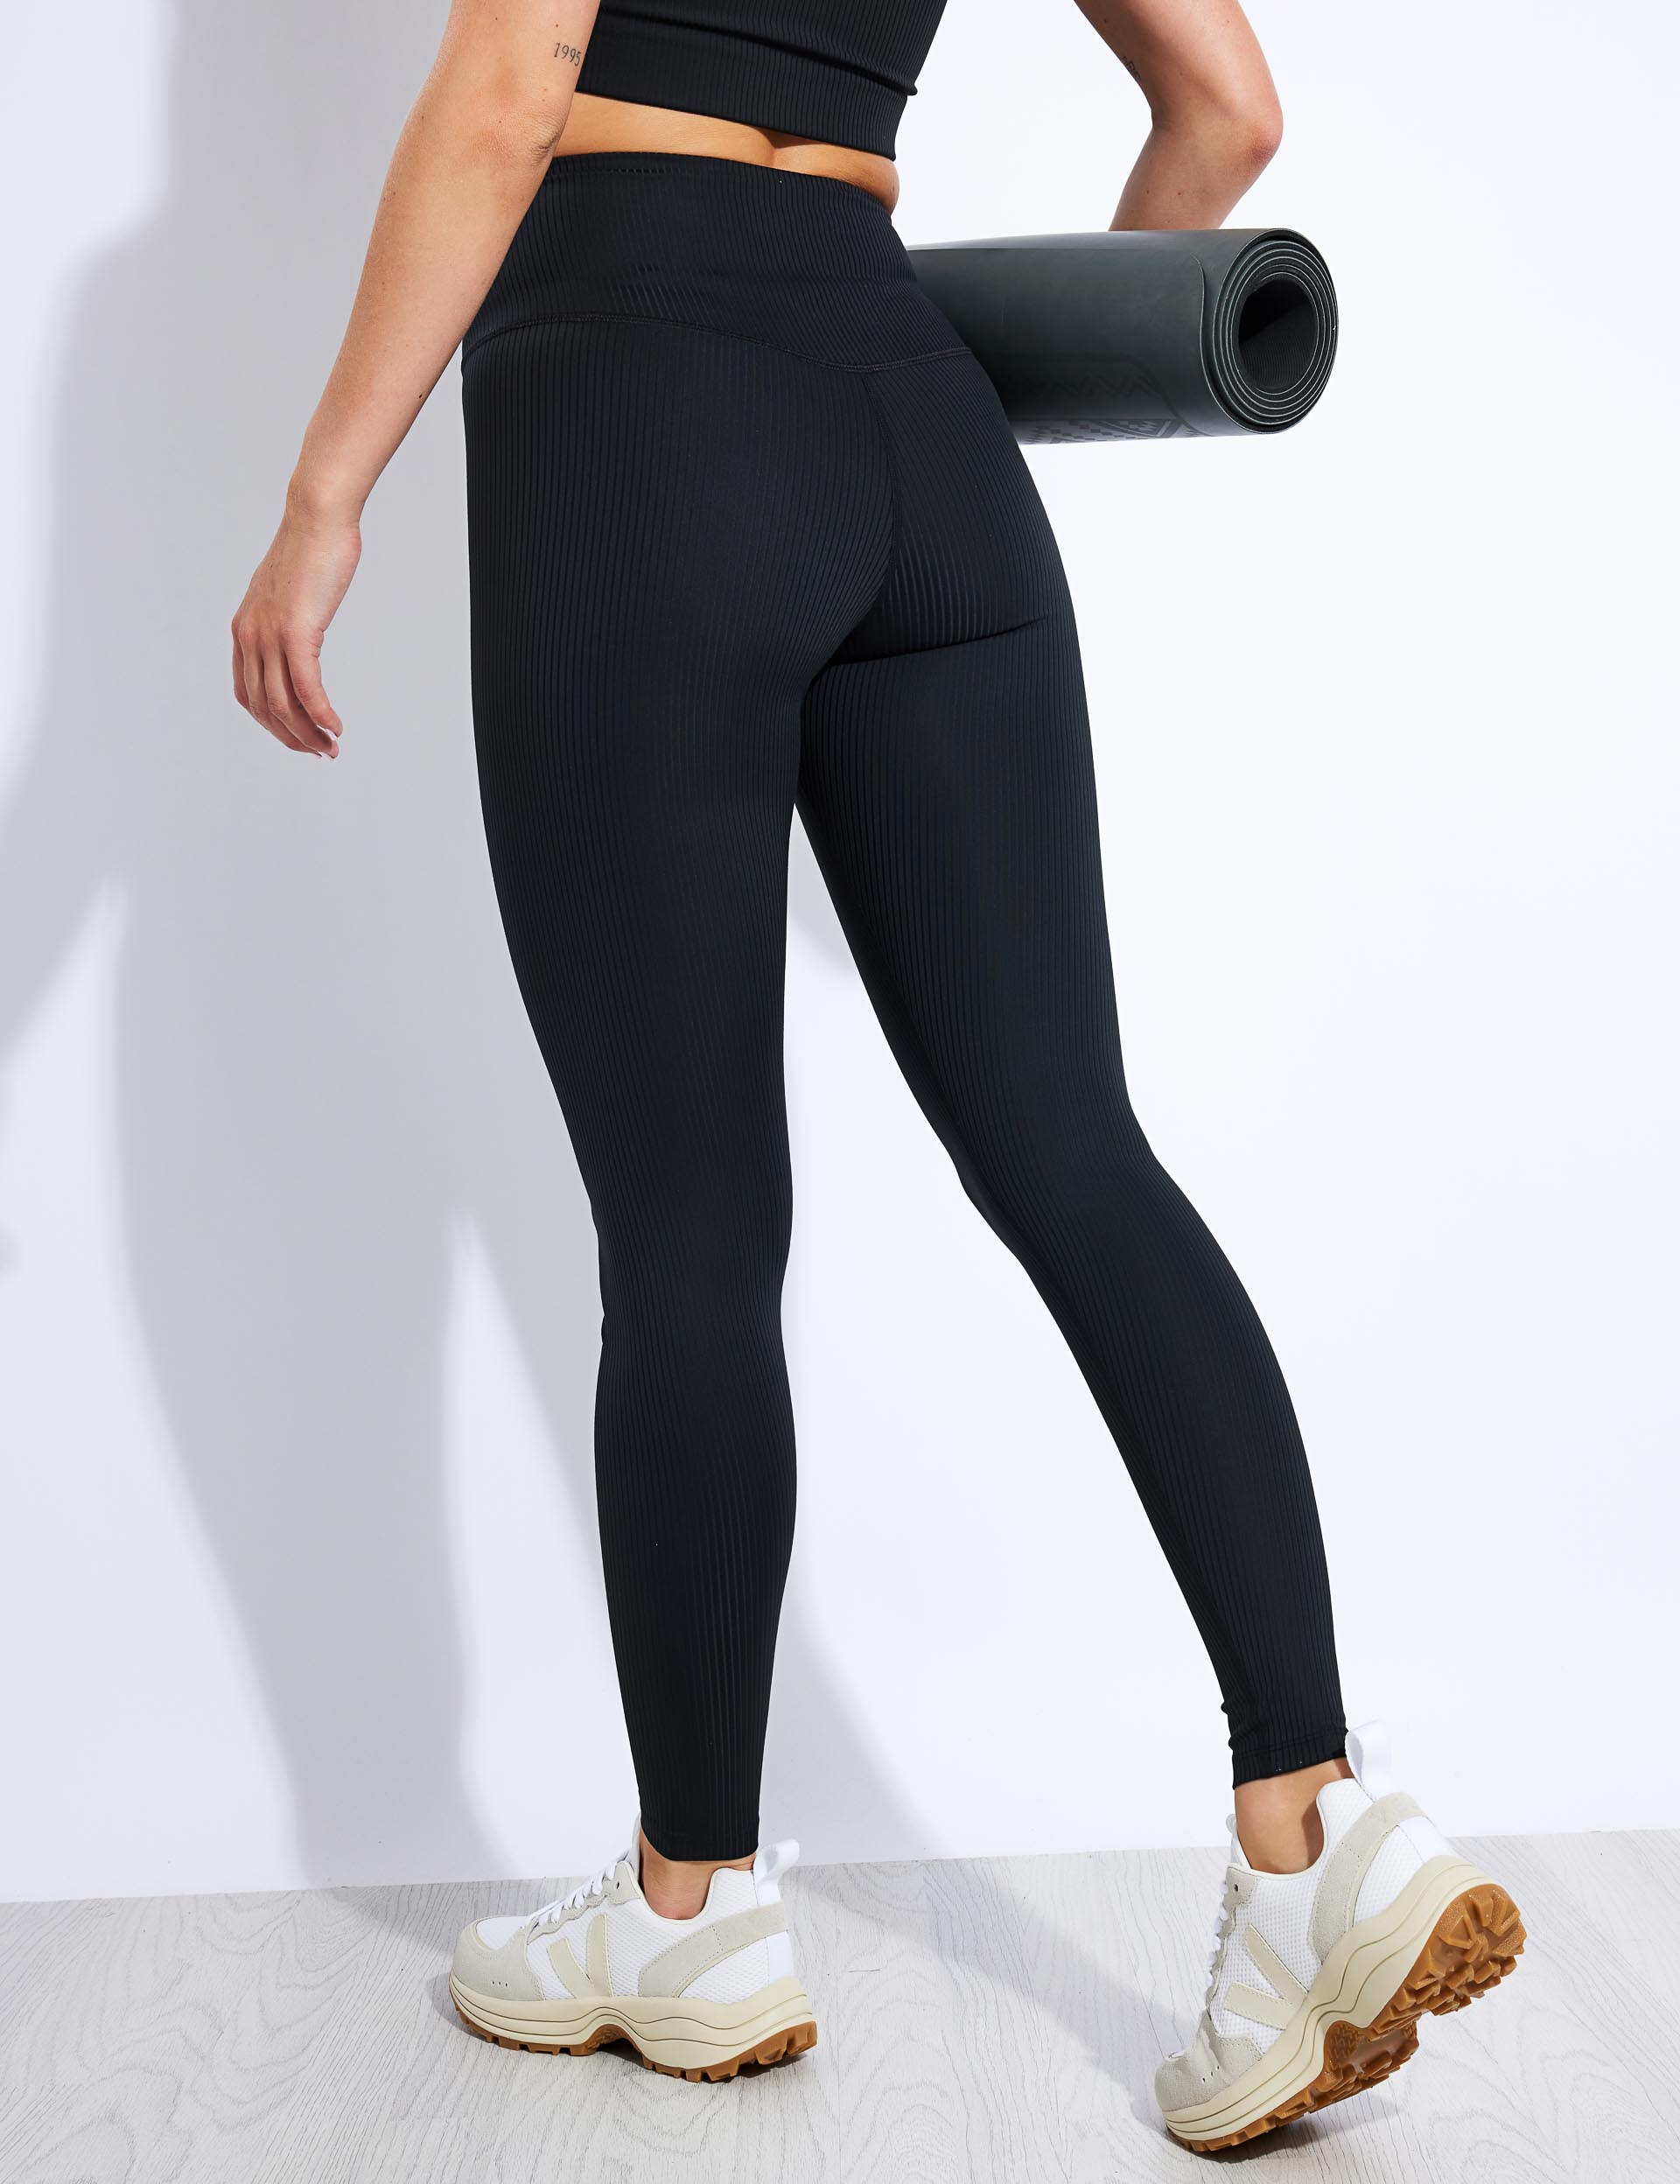 Girlfriend Collective Float Seamless High-Rise Legging Review